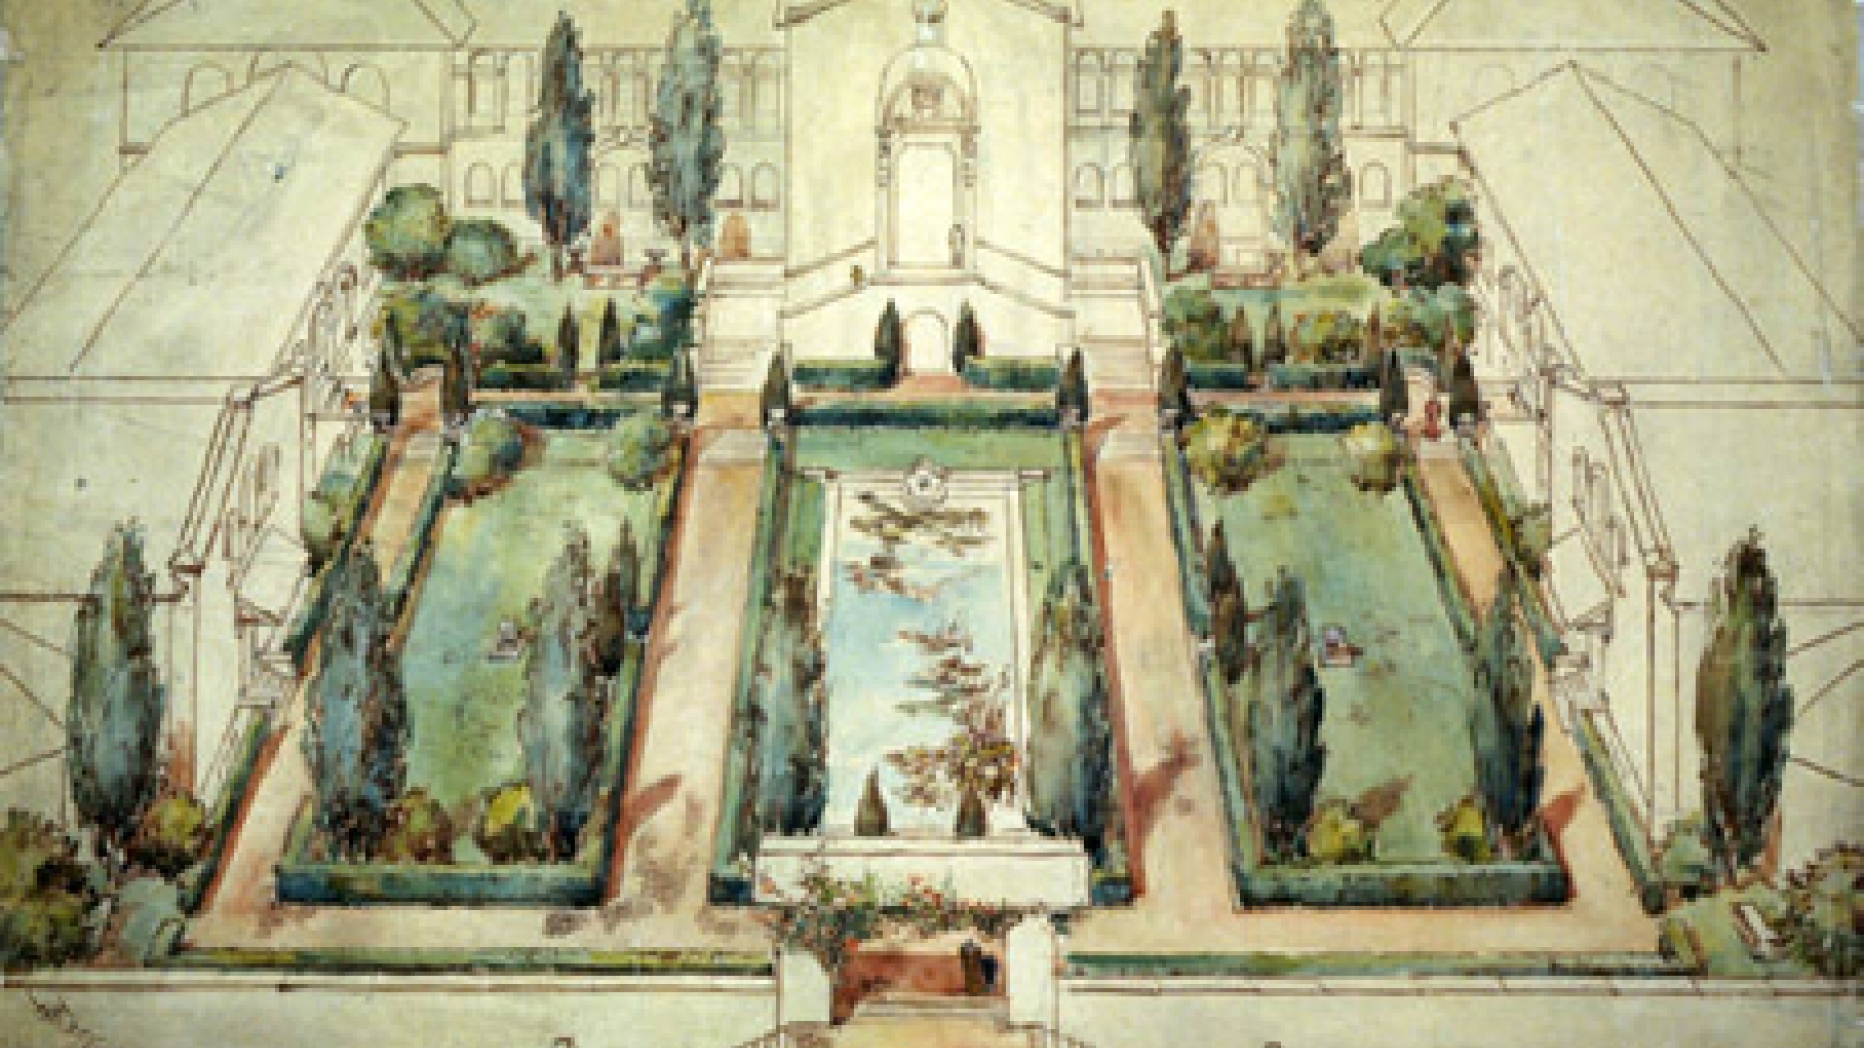 Partially colored illustration of Graeco roman buildings with courtyard with two lawn-gardens and a fountain in the center